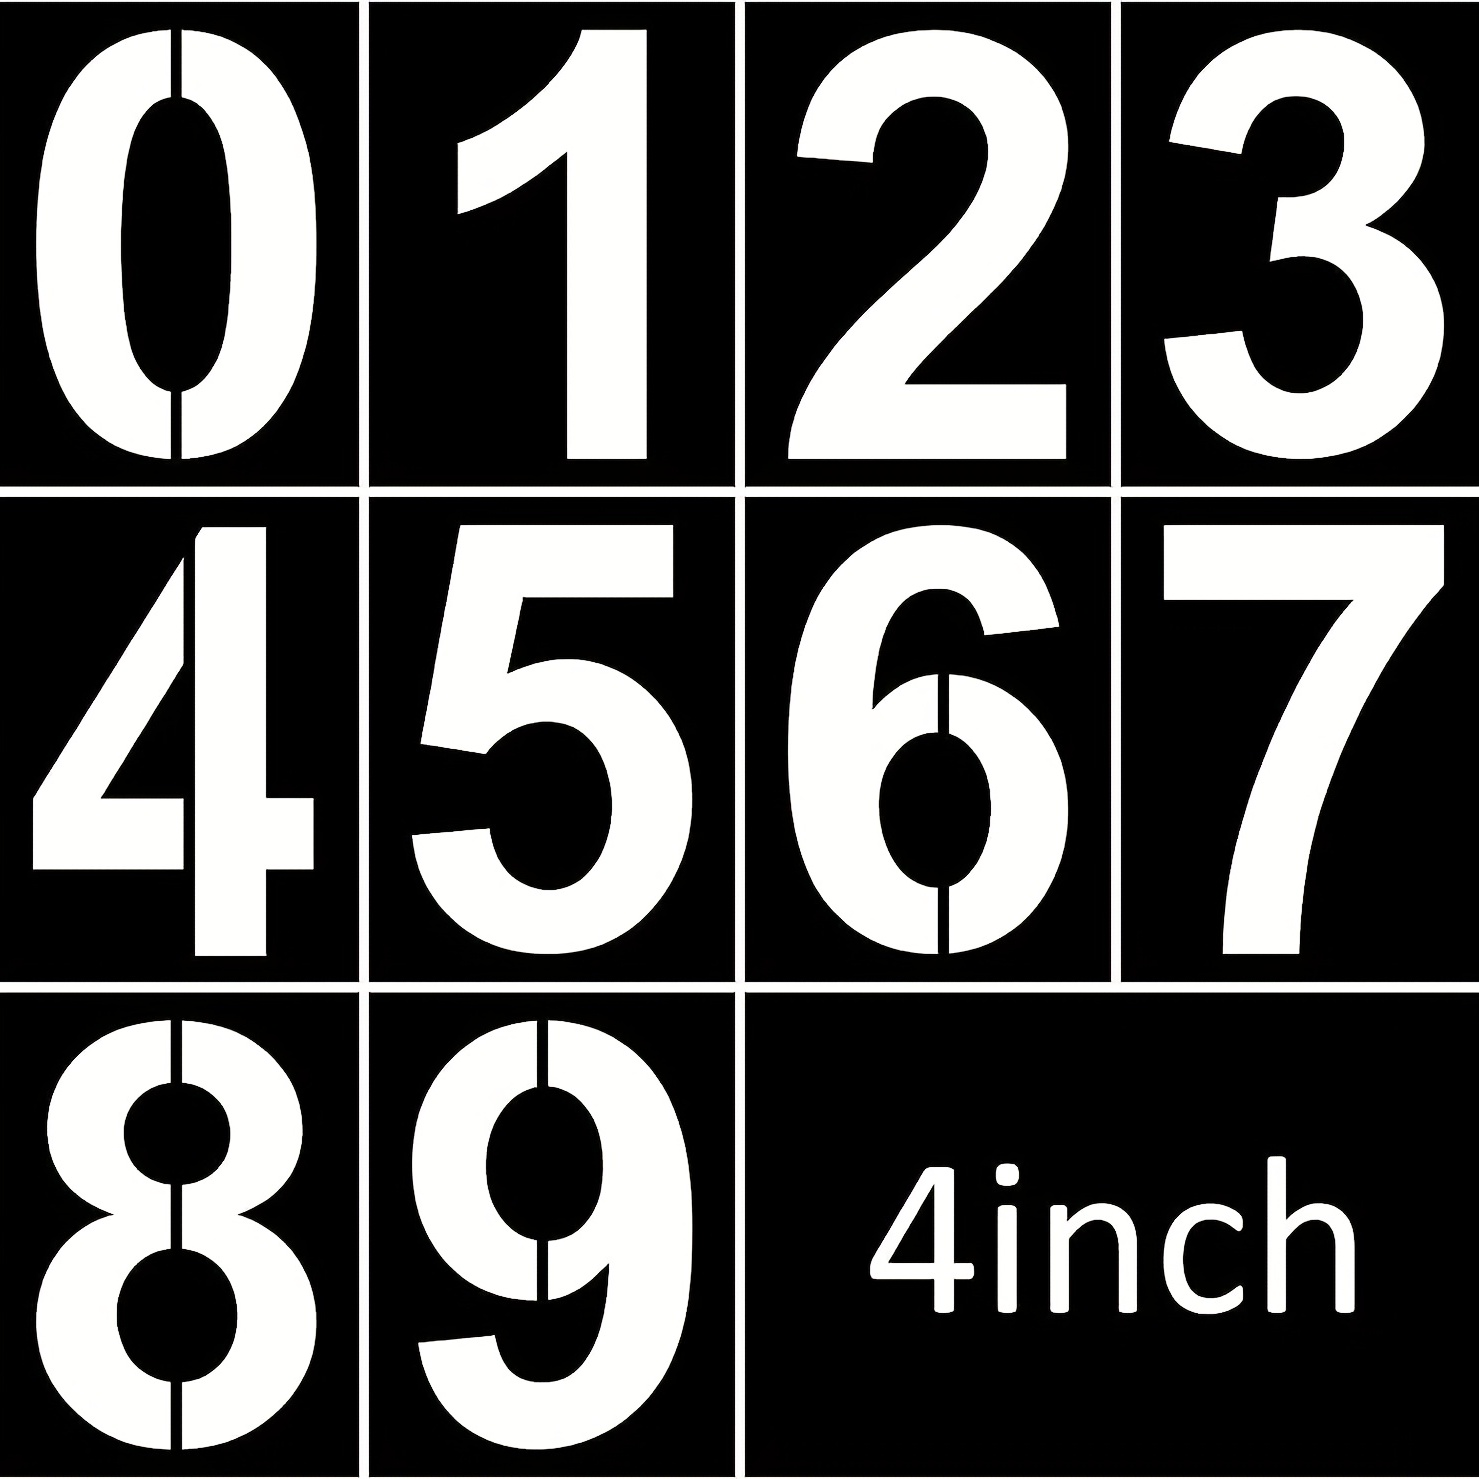 Football Jersey Number Posters with Numeral, Word, & Ten Frame- 0-20